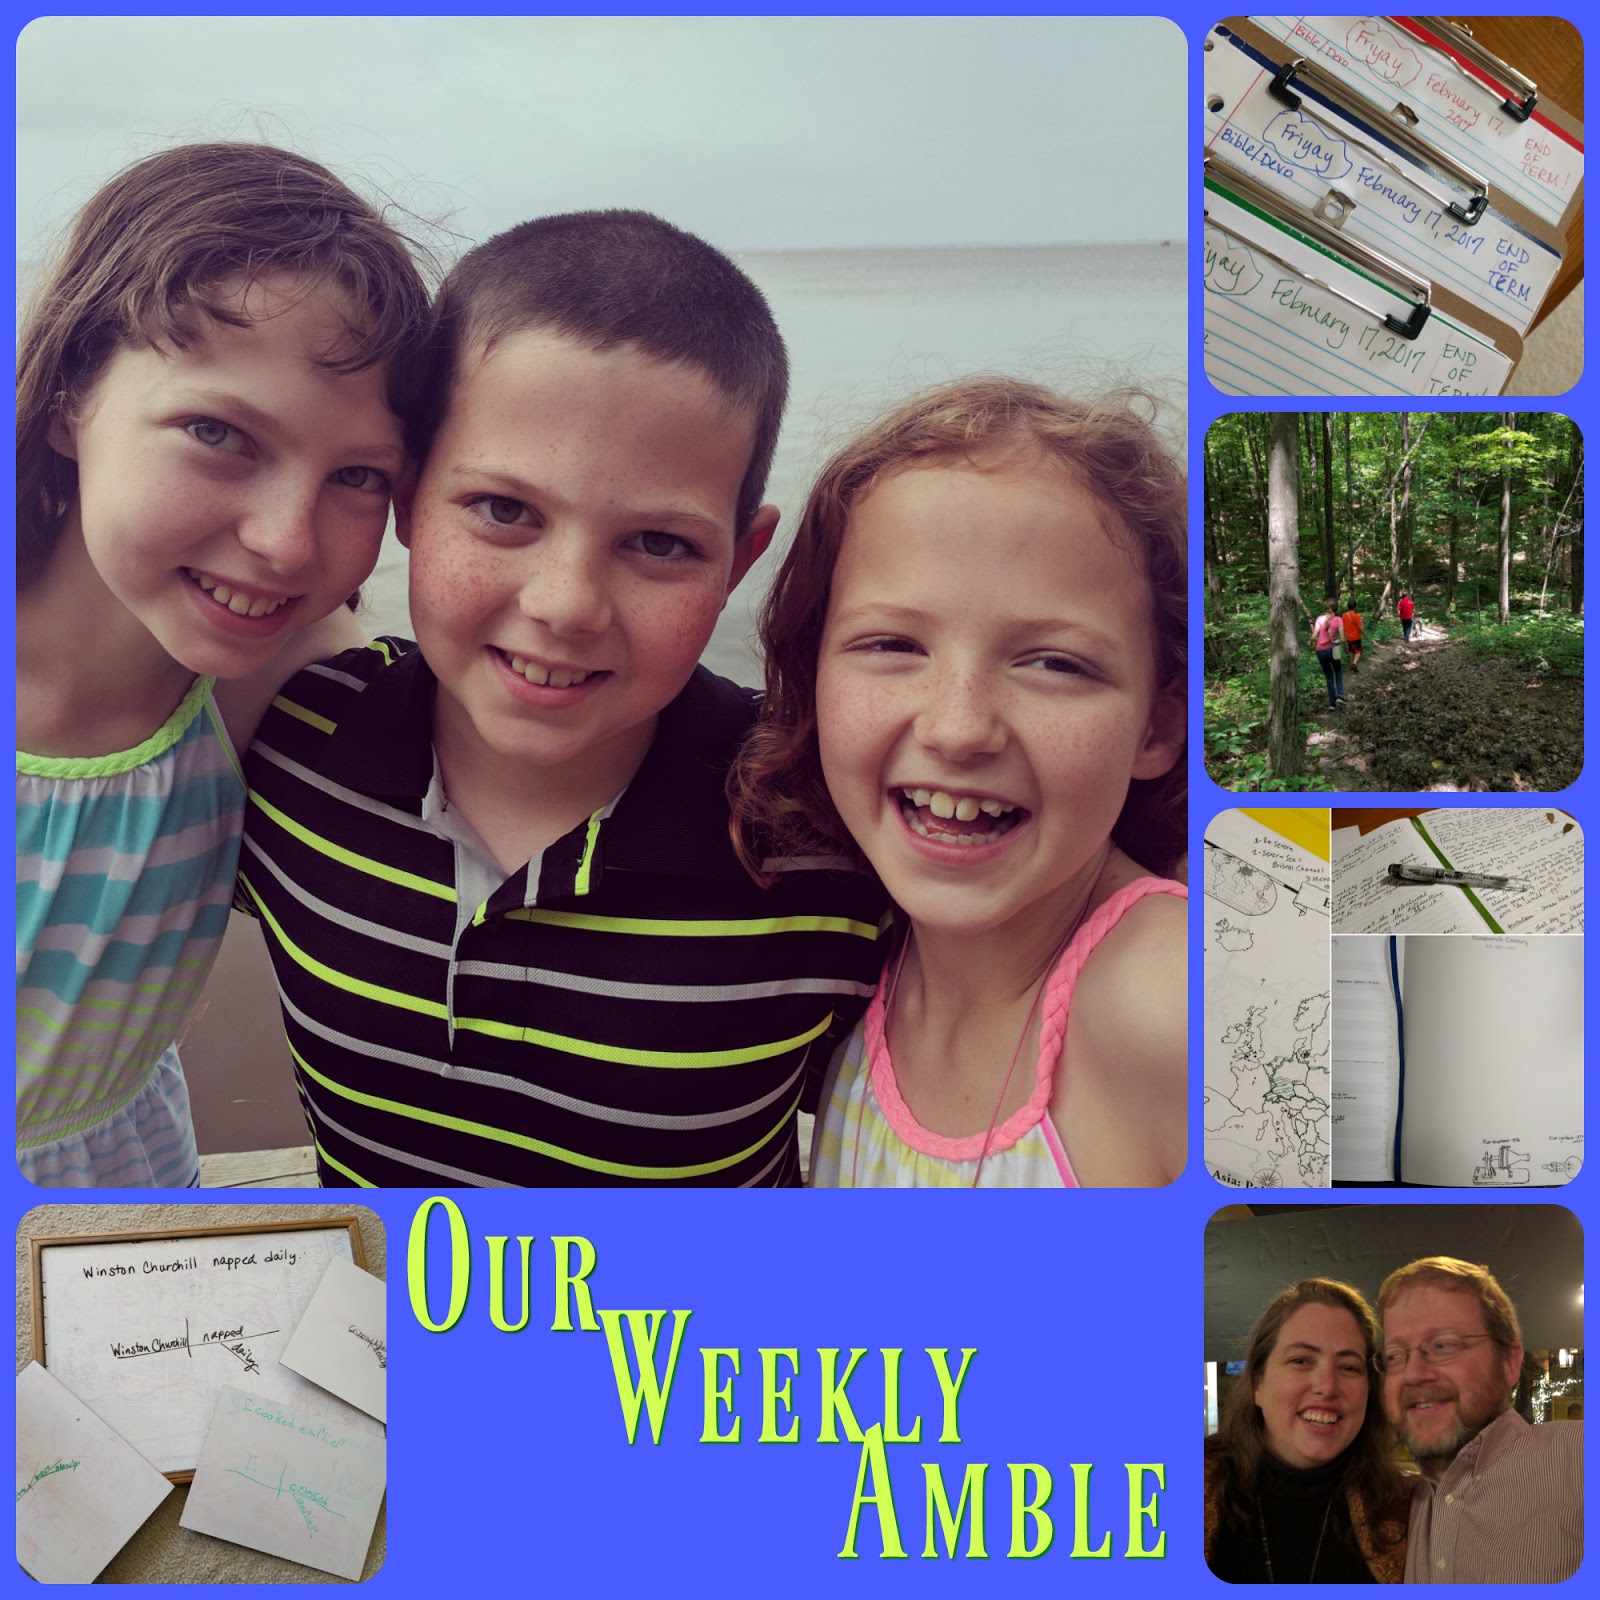 Our Weekly Amble for September 11-15, 2017